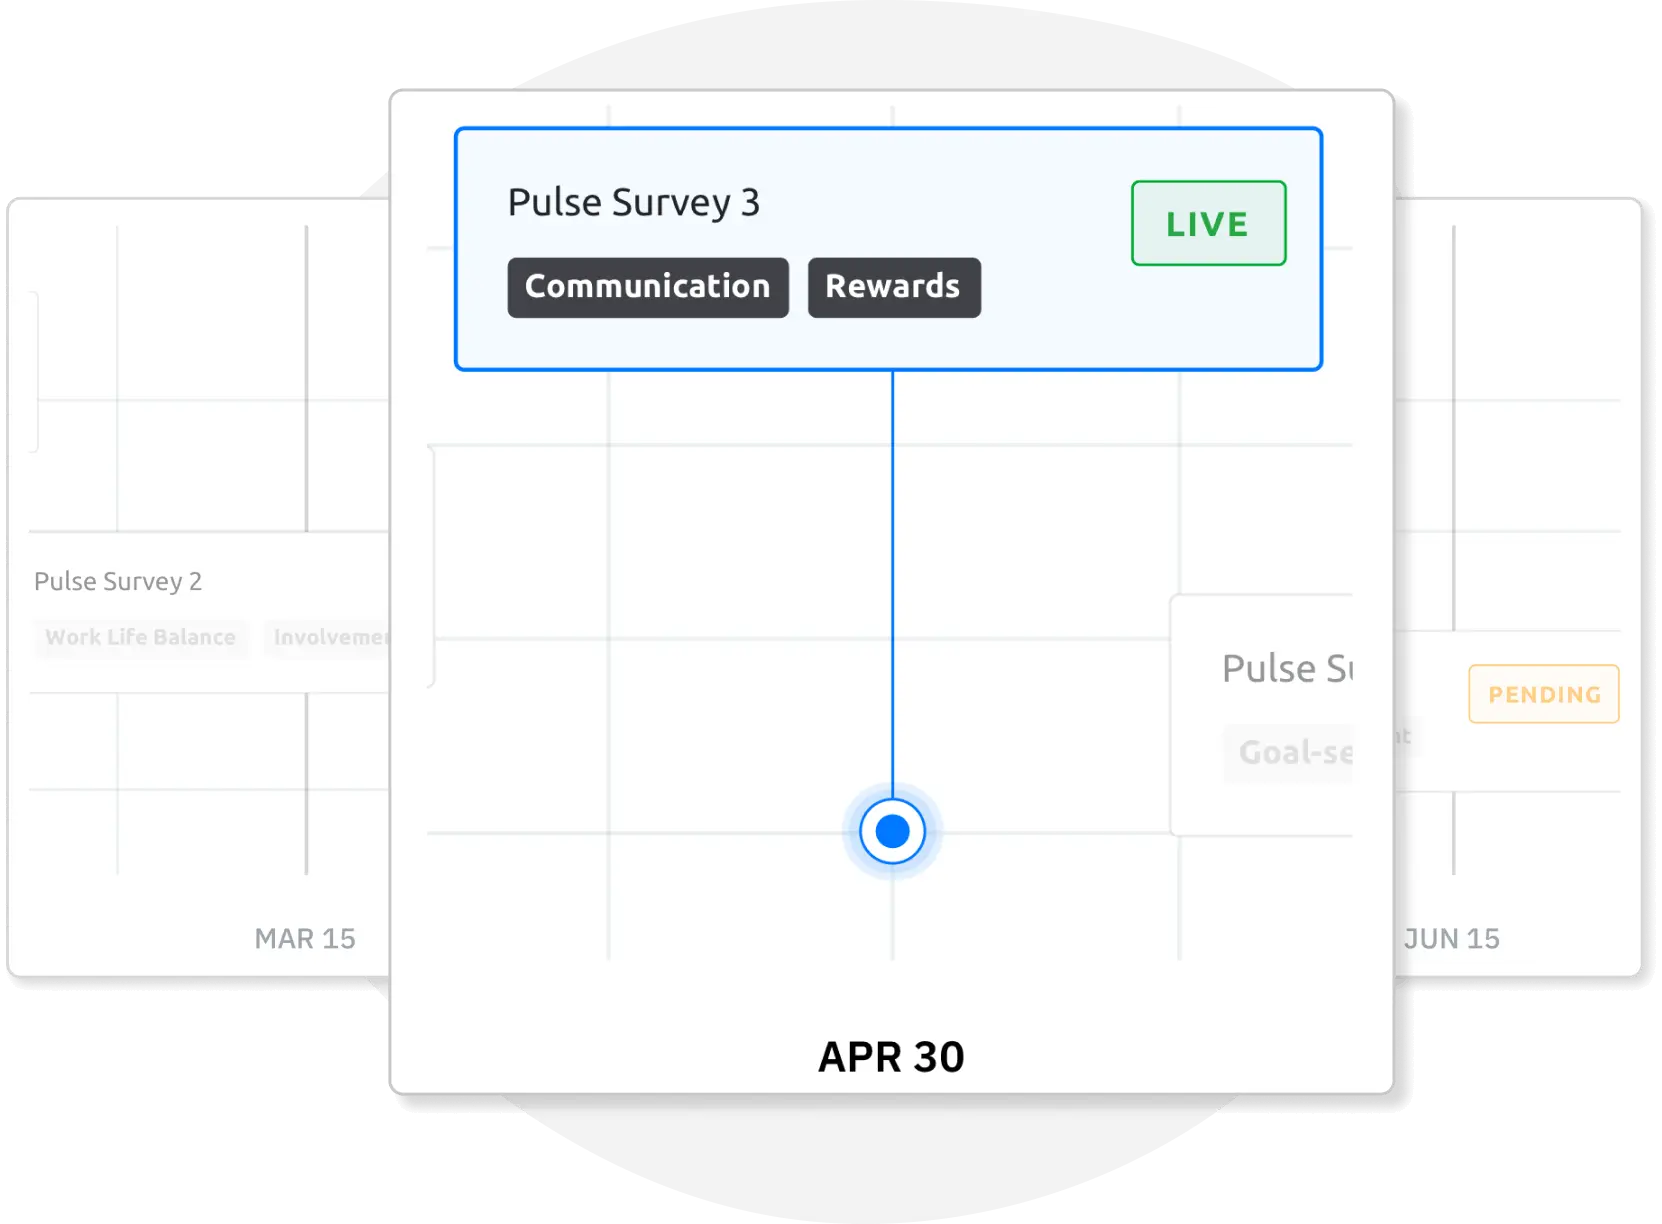 Set the frequency of the pulse survey in a time-frame that is comfortable for you to take actions on the feedback received